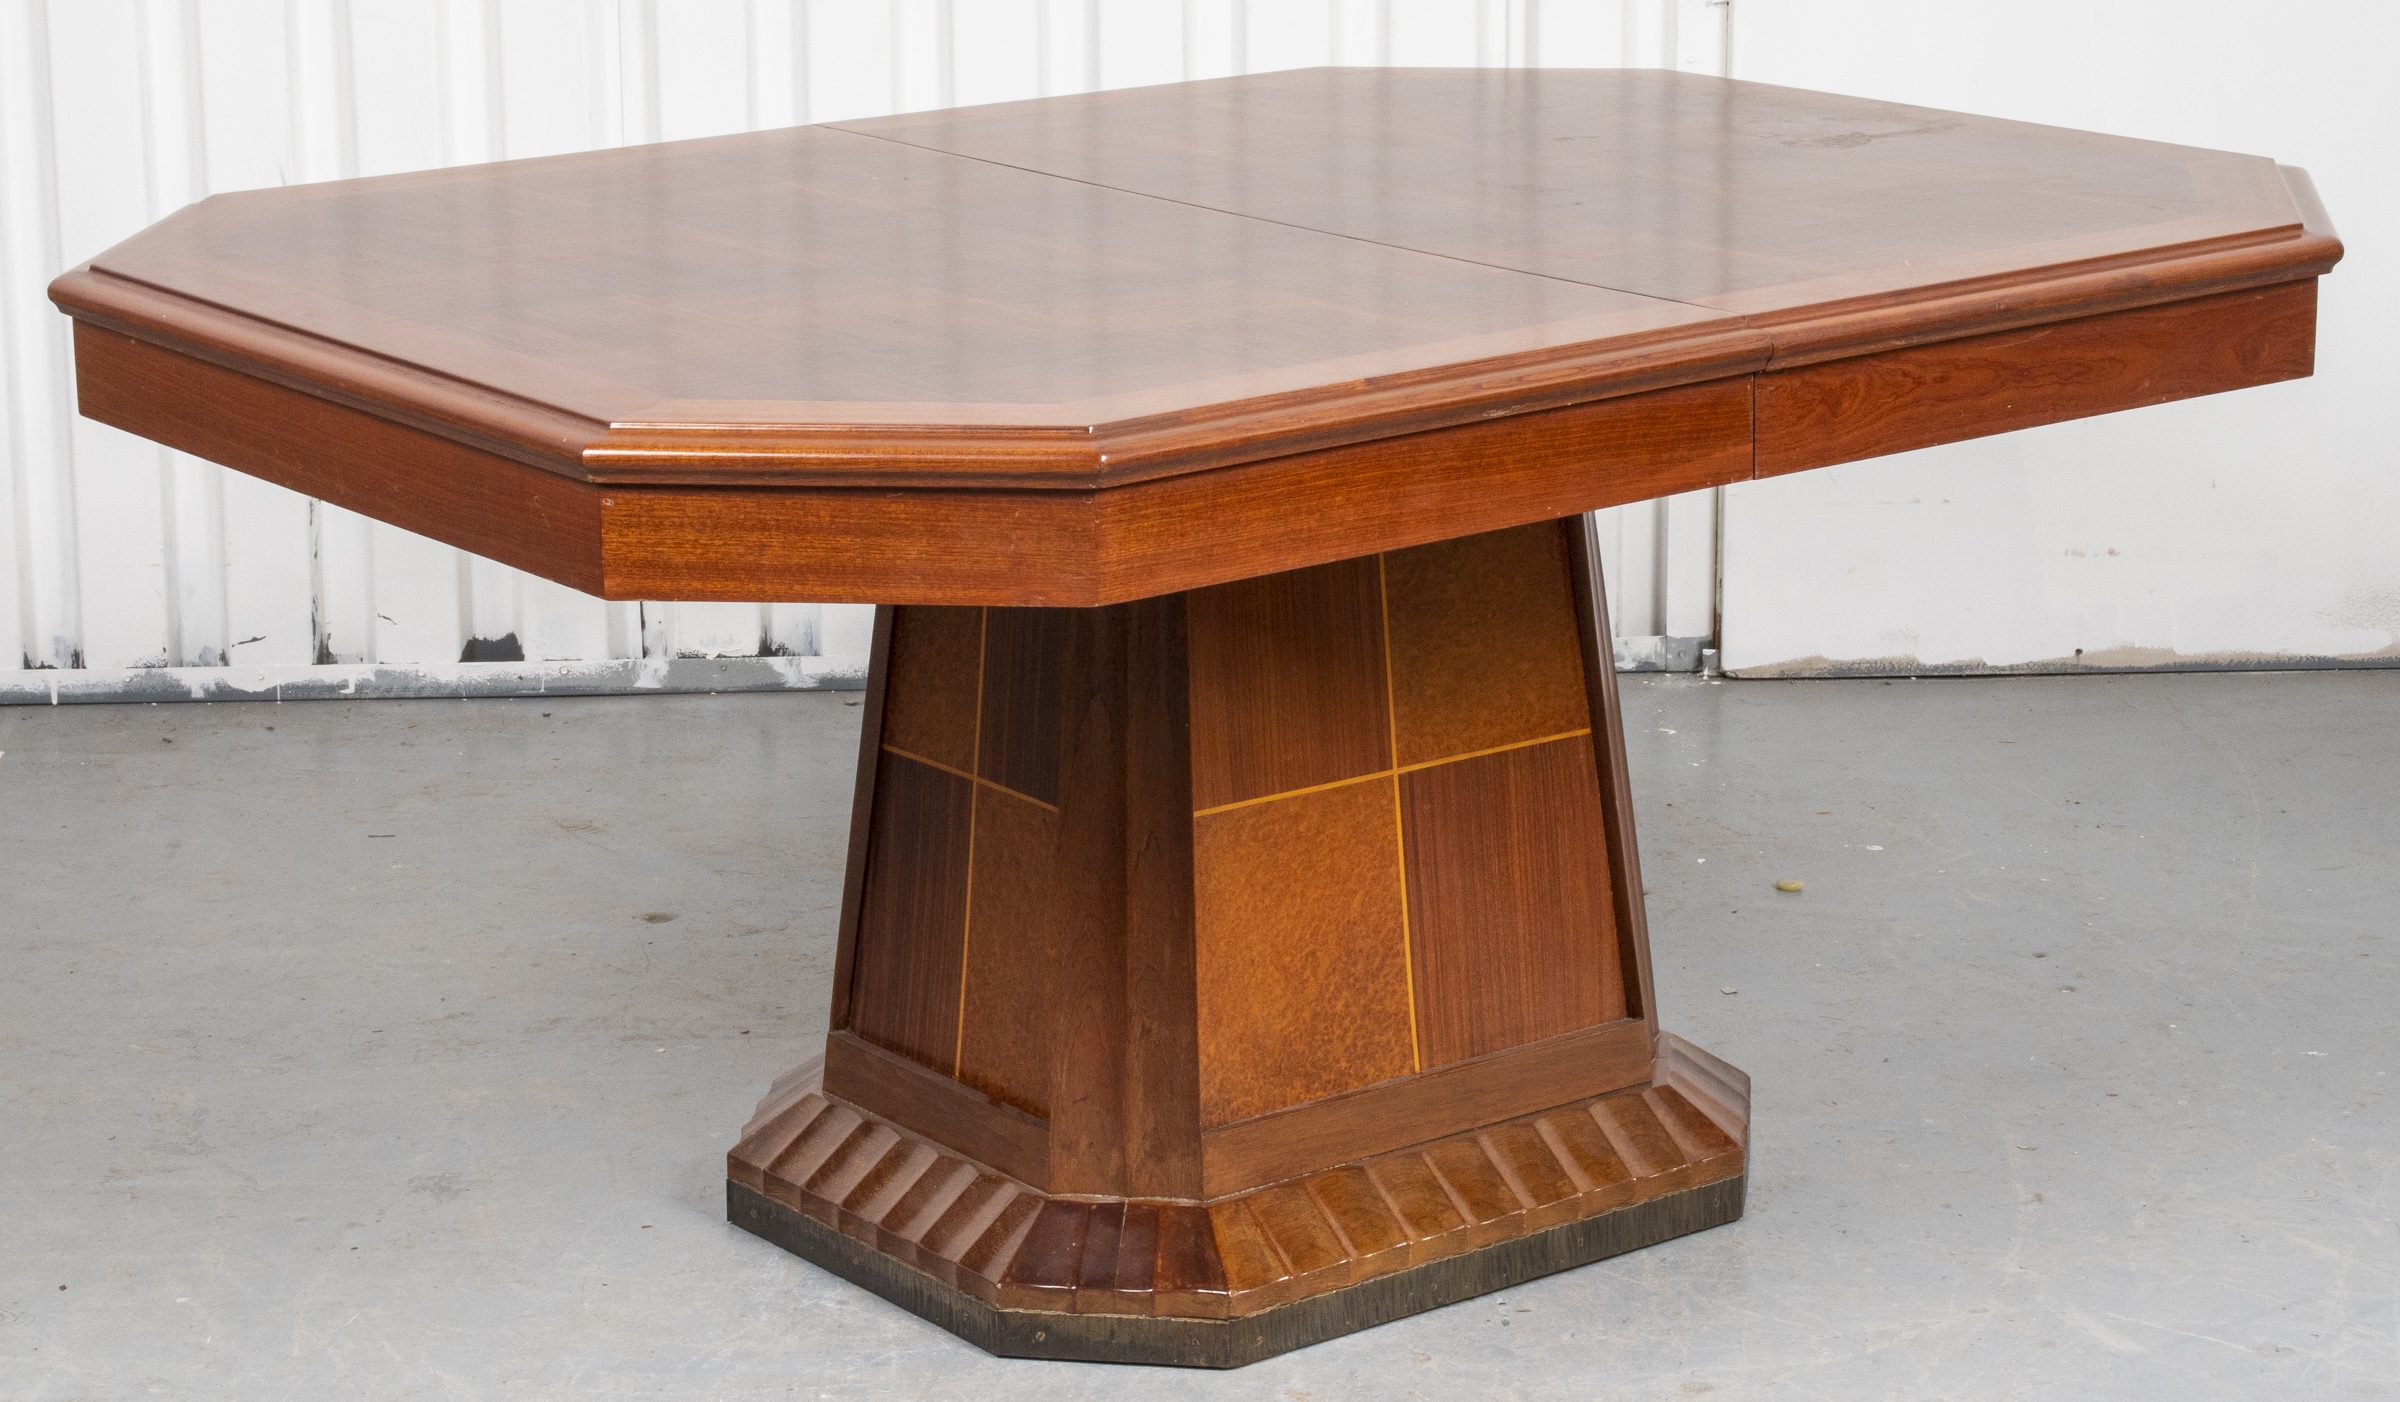 ART DECO MIXED WOOD DINING TABLE 3c41e4